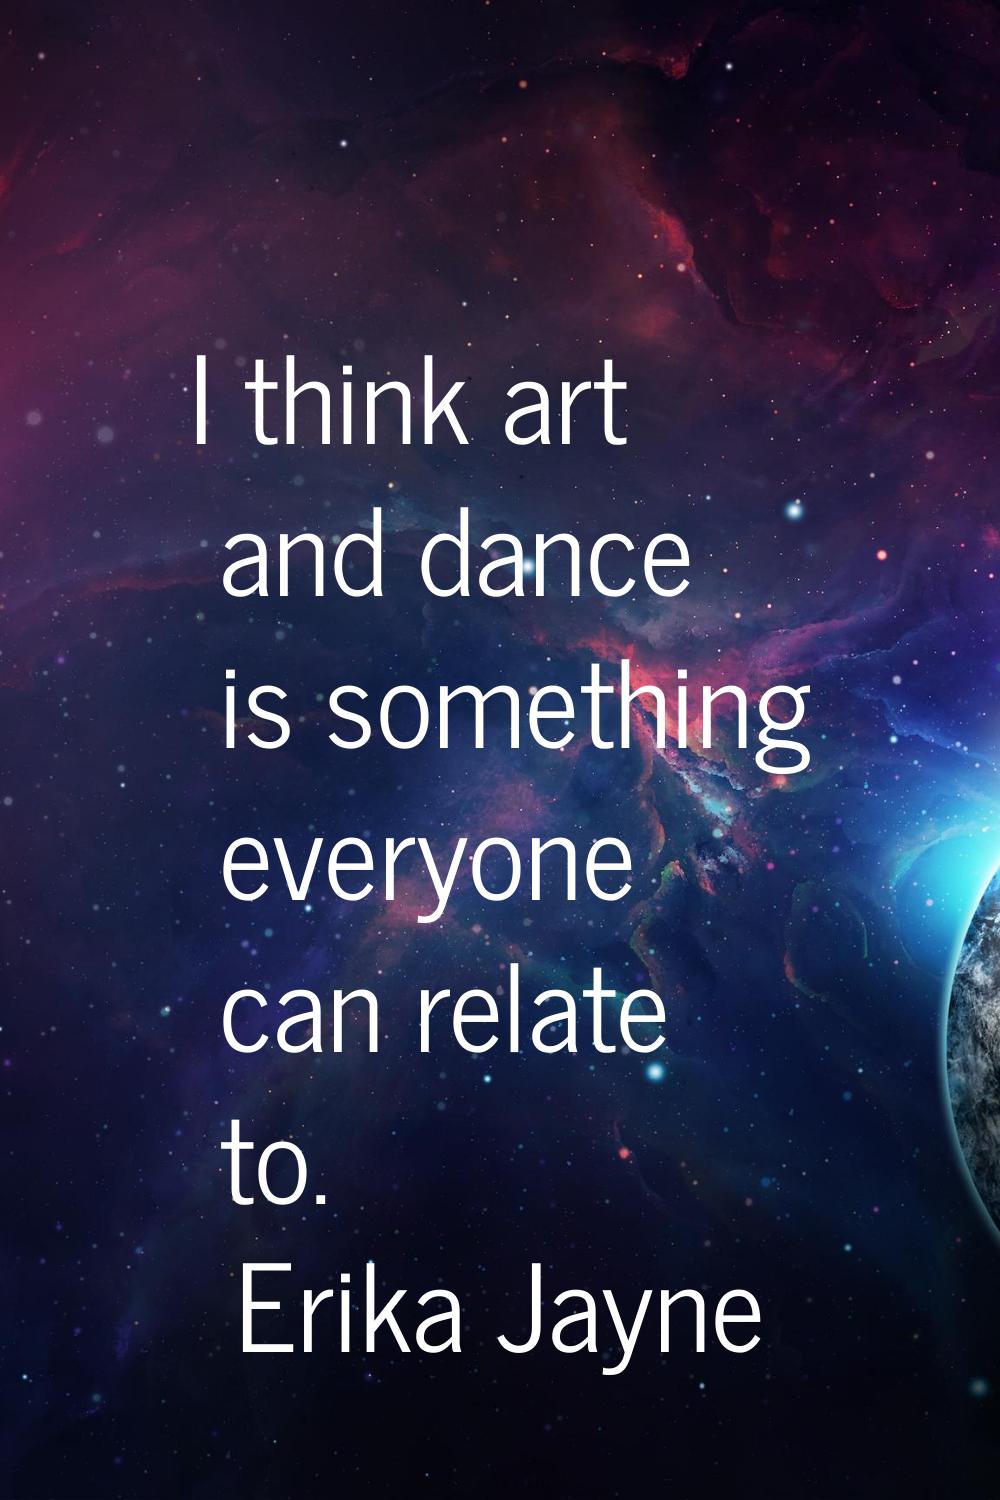 I think art and dance is something everyone can relate to.